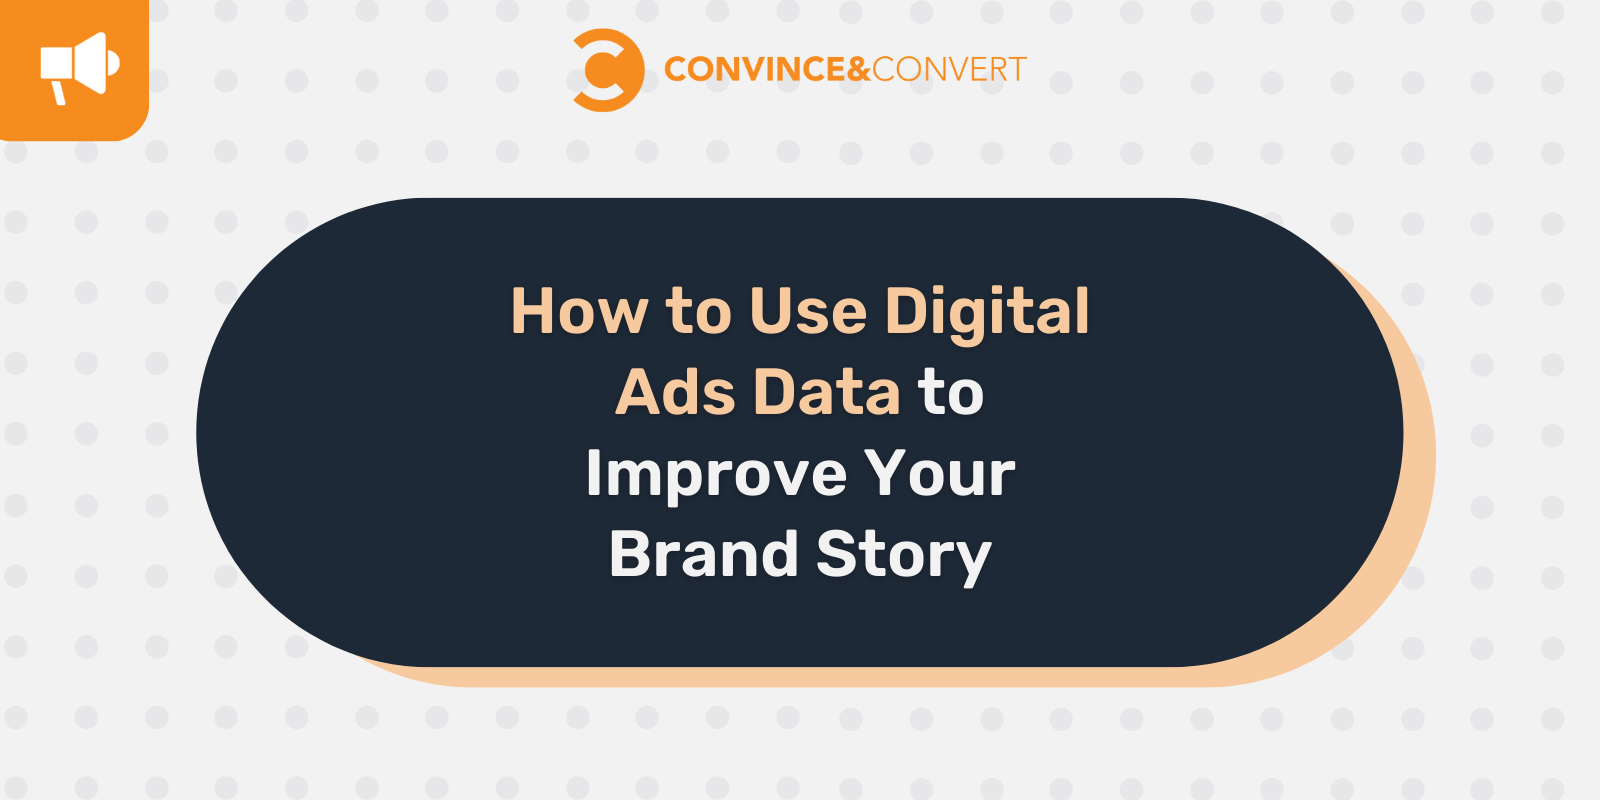 How to Use Digital Ads Data to Improve Your Brand Story